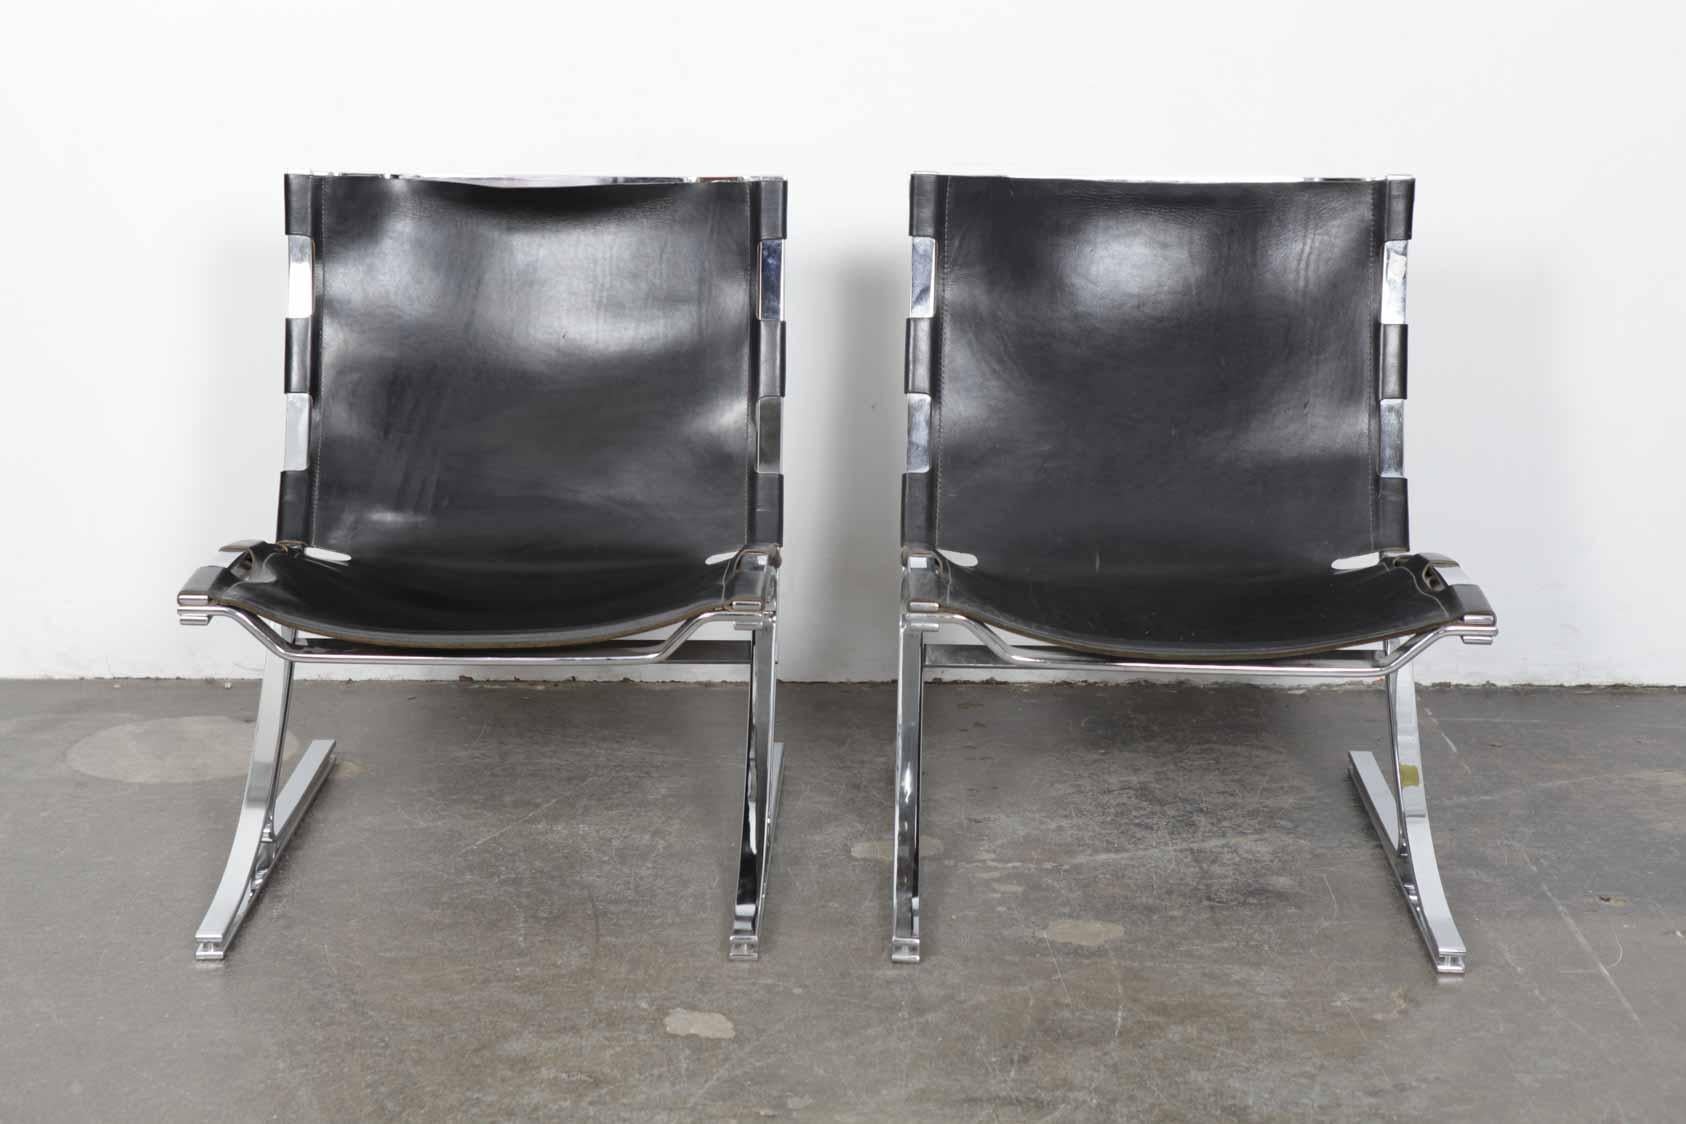 Pair of very rare flat bar metal and original black leather sling chairs designed by Meinhard Von Gerkan, German Architect, in 1972 for the VIP lounge in the Berlin Airport. A total of 48 of these were produced by Walter Knoll. These are from the